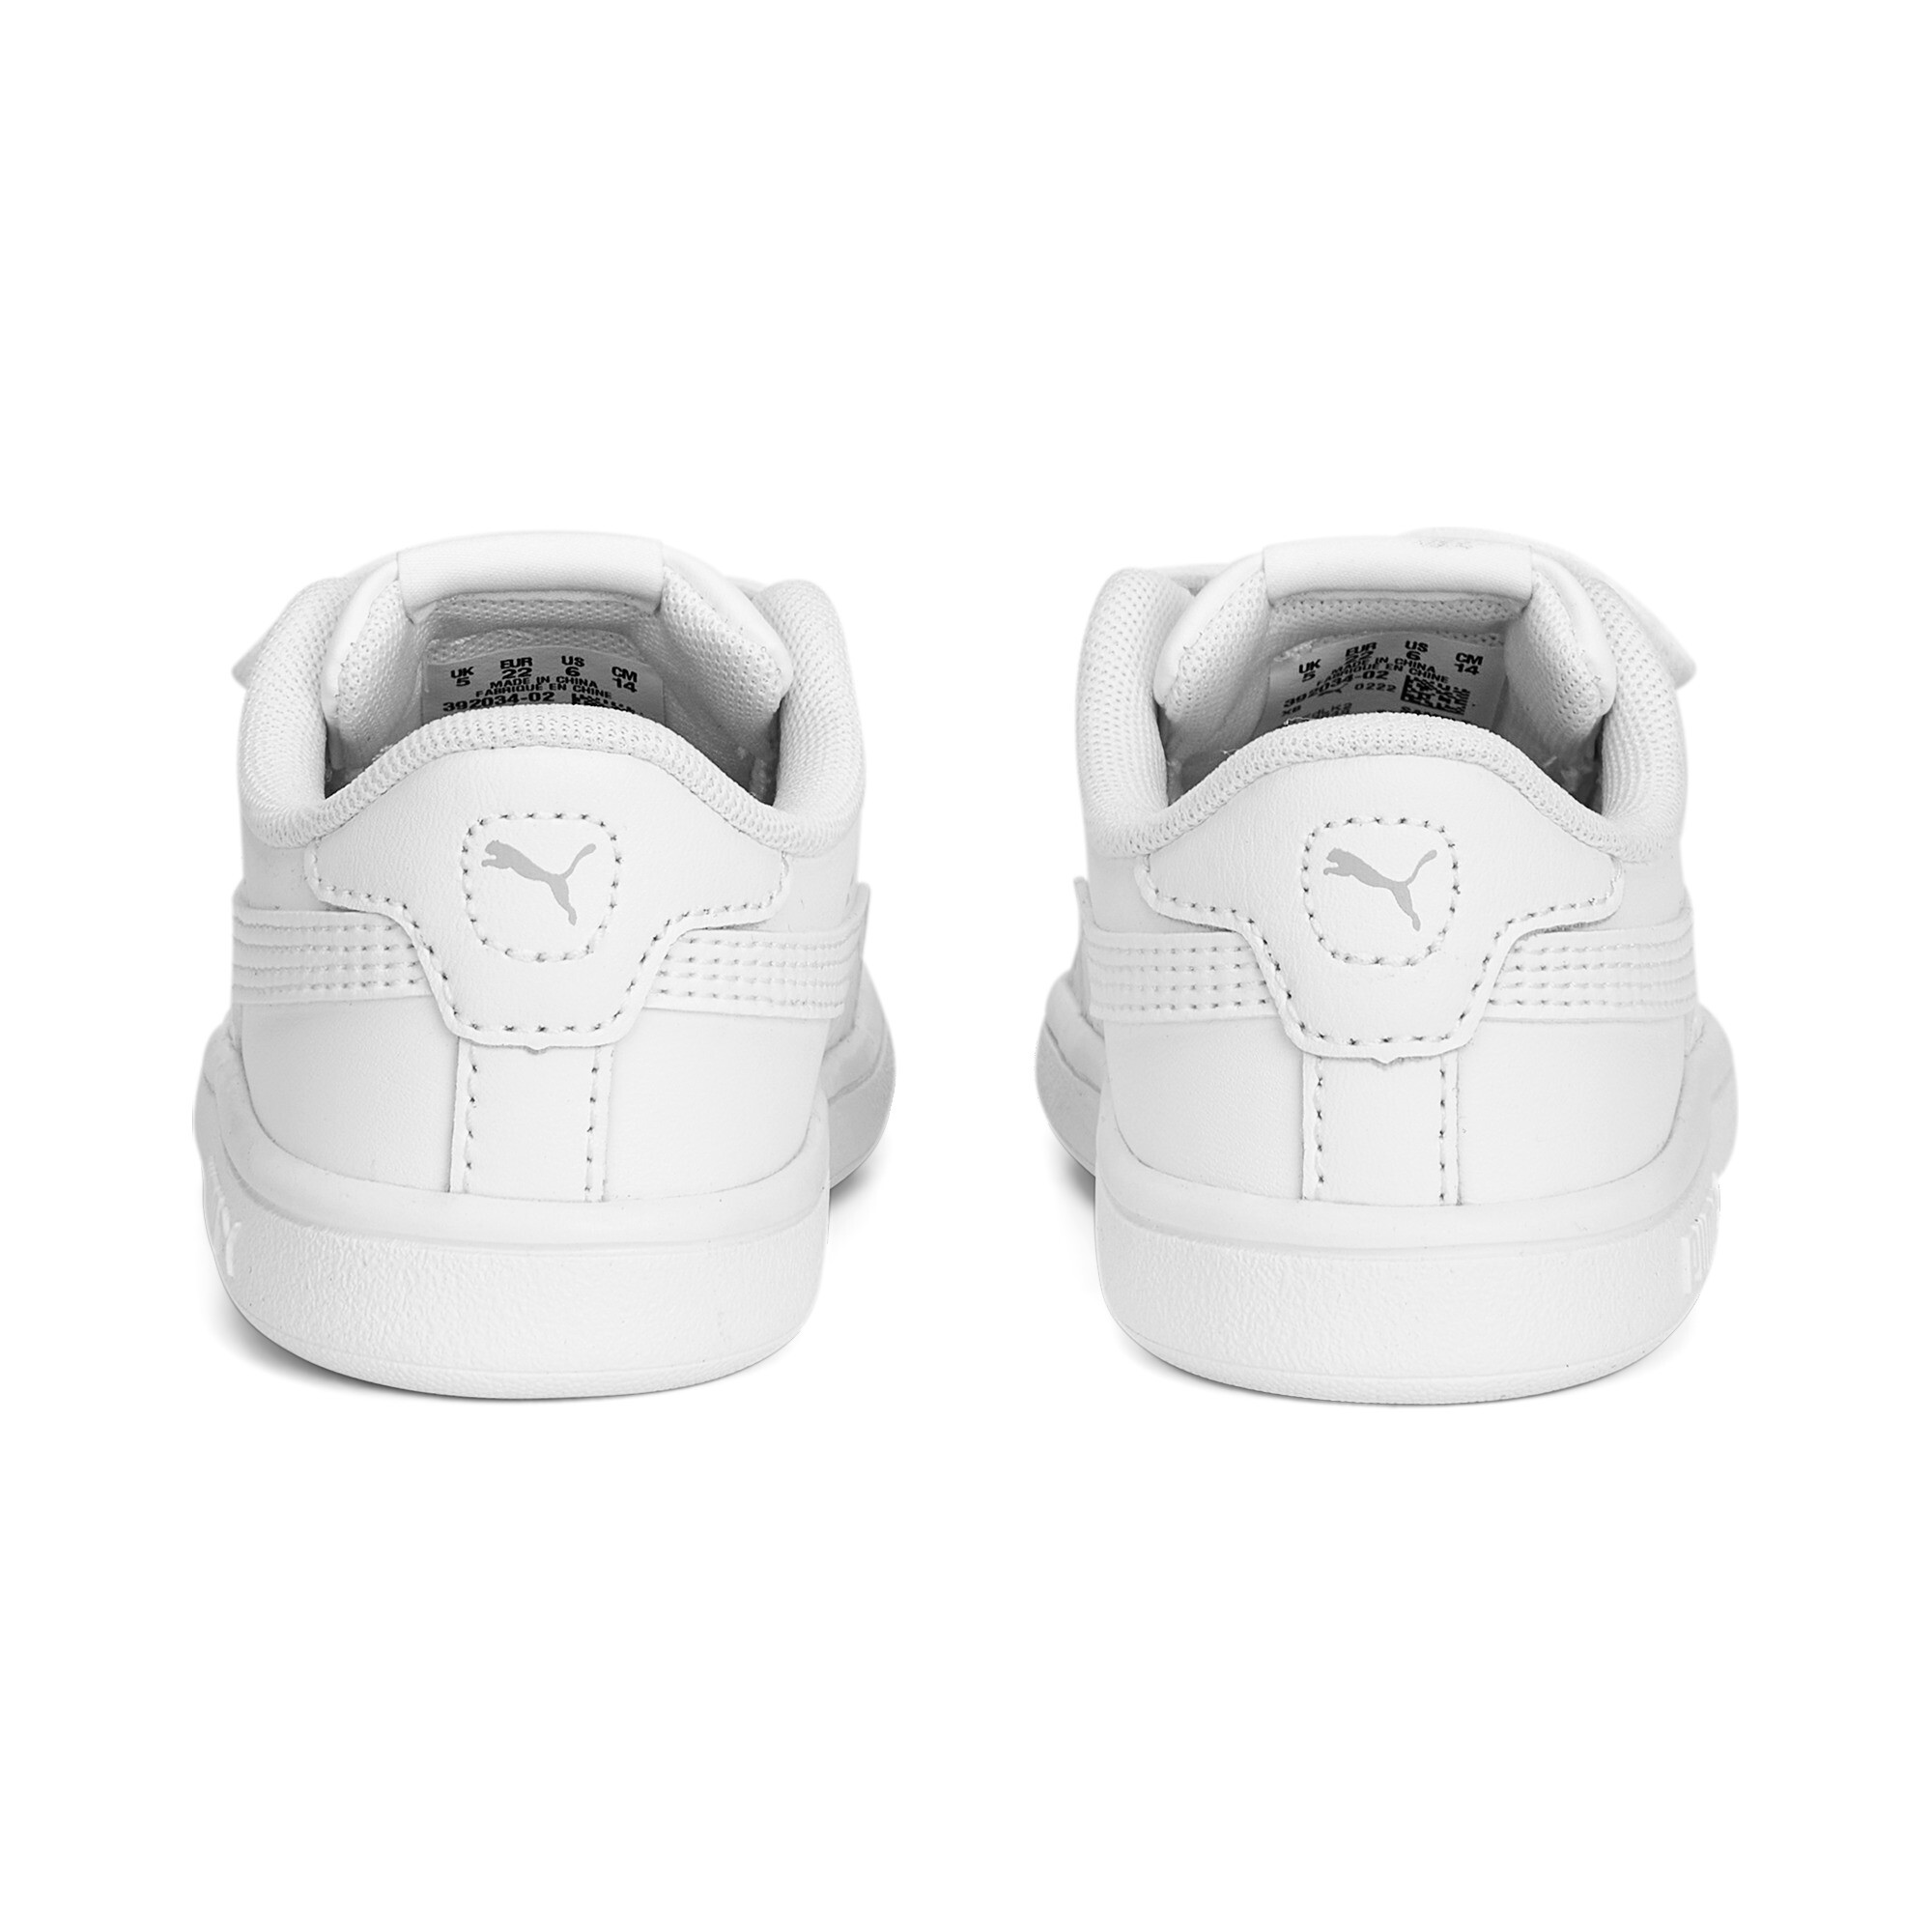 Kids' PUMA Smash 3.0 Leather V Sneakers Baby In White, Size EU 27